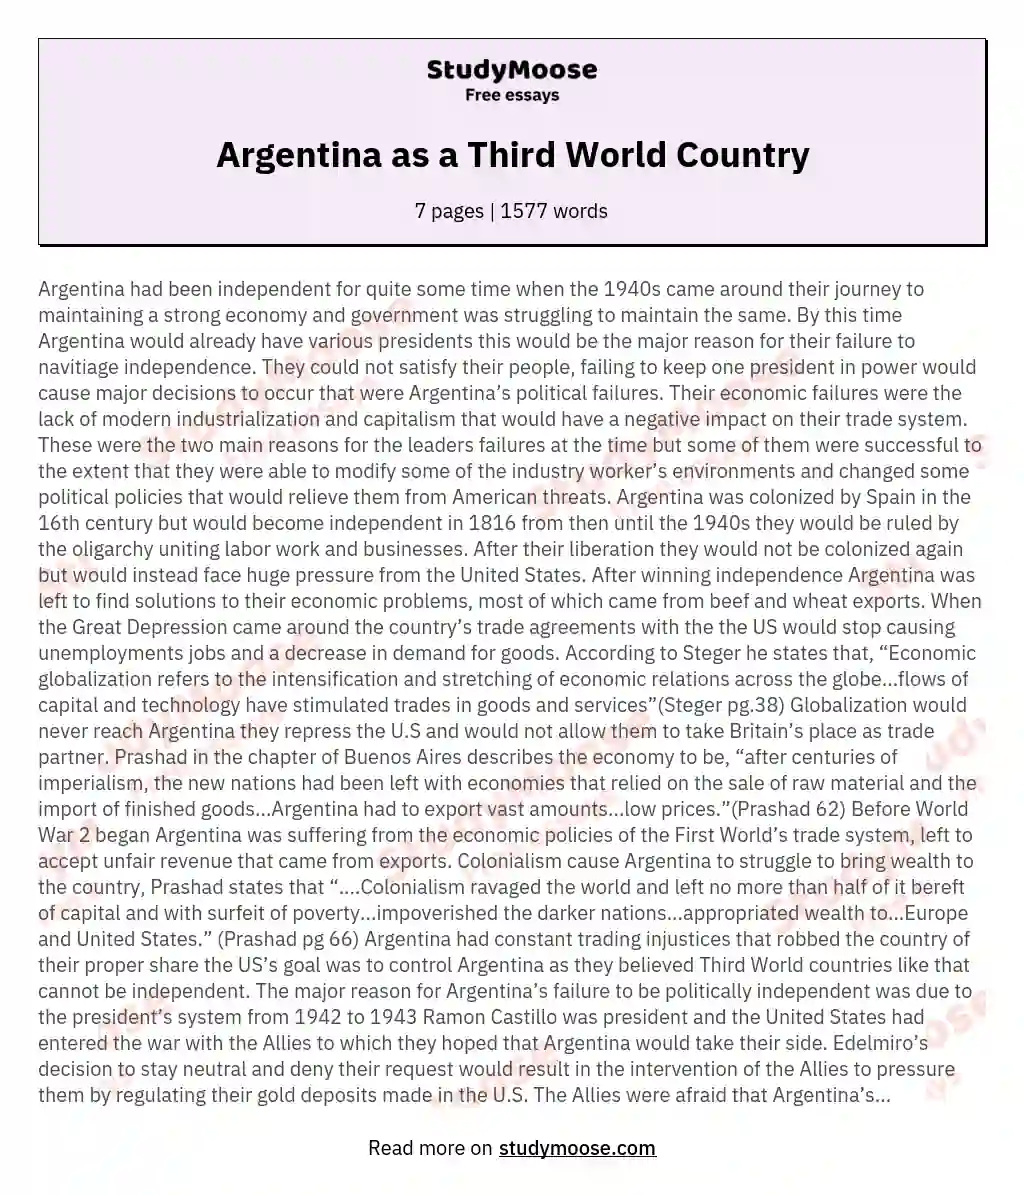 Argentina as a Third World Country essay